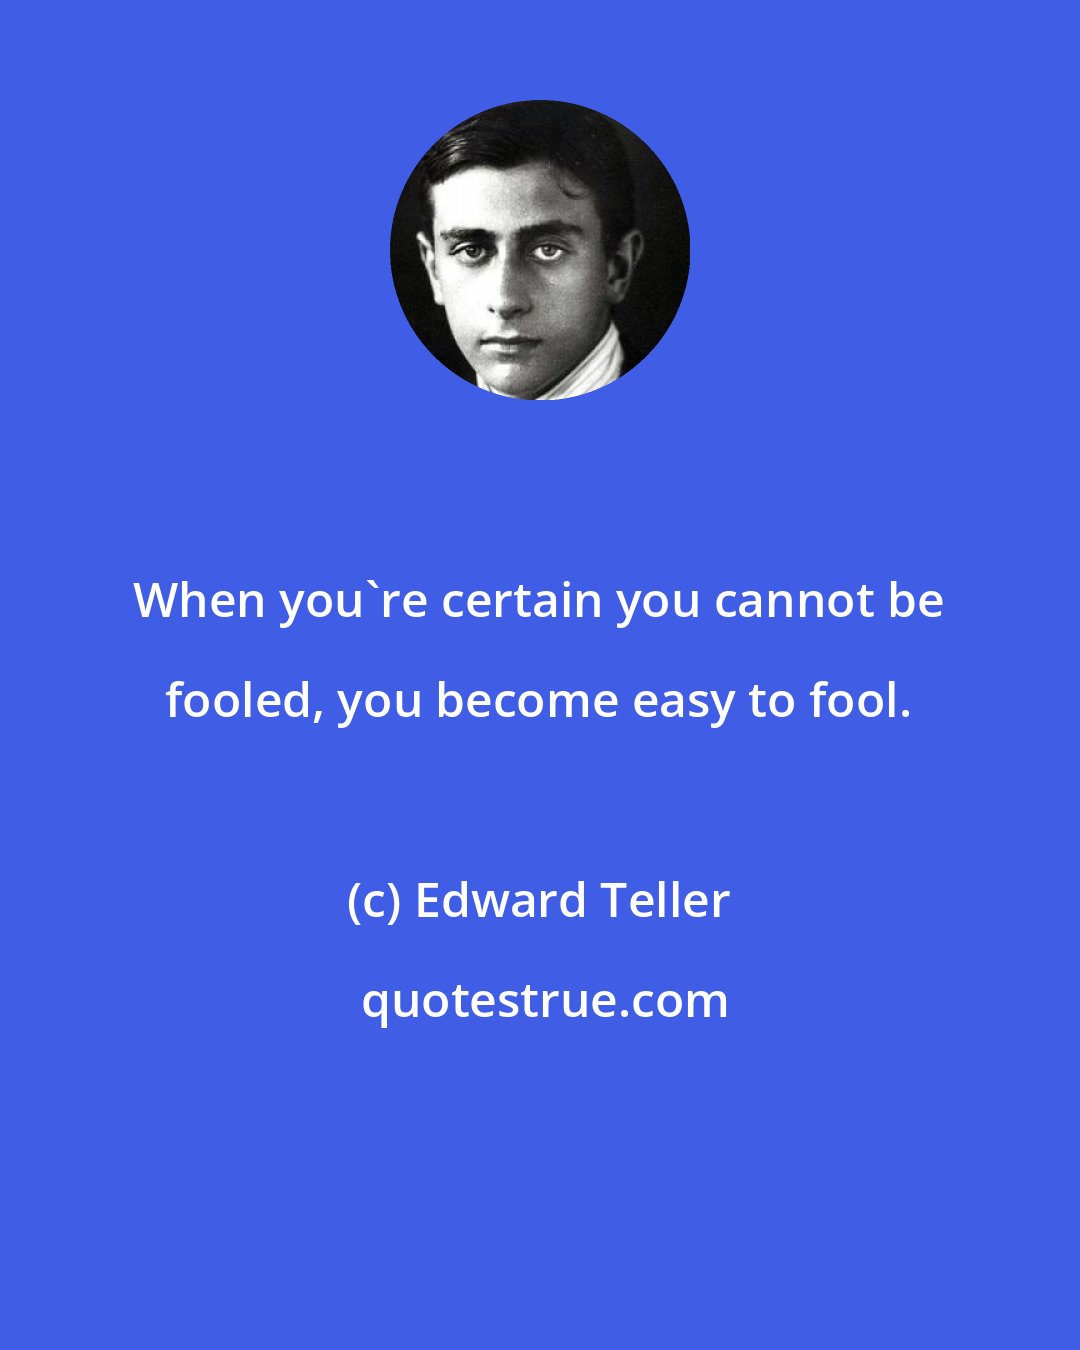 Edward Teller: When you're certain you cannot be fooled, you become easy to fool.